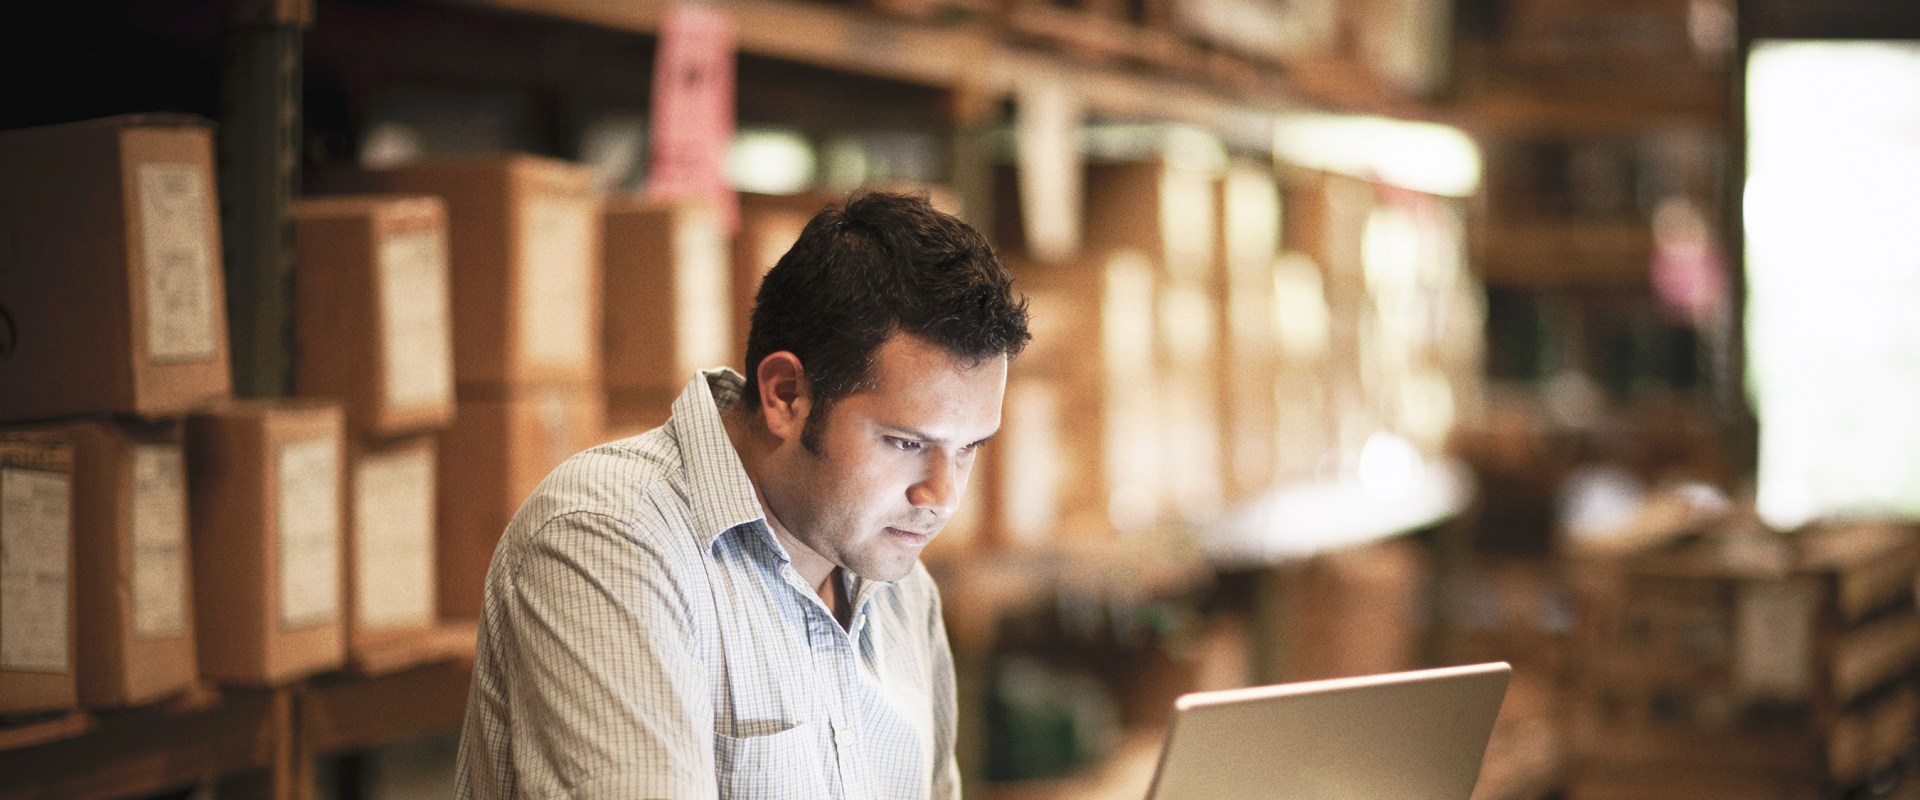 Inventory Management Software for Small Businesses: An Overview